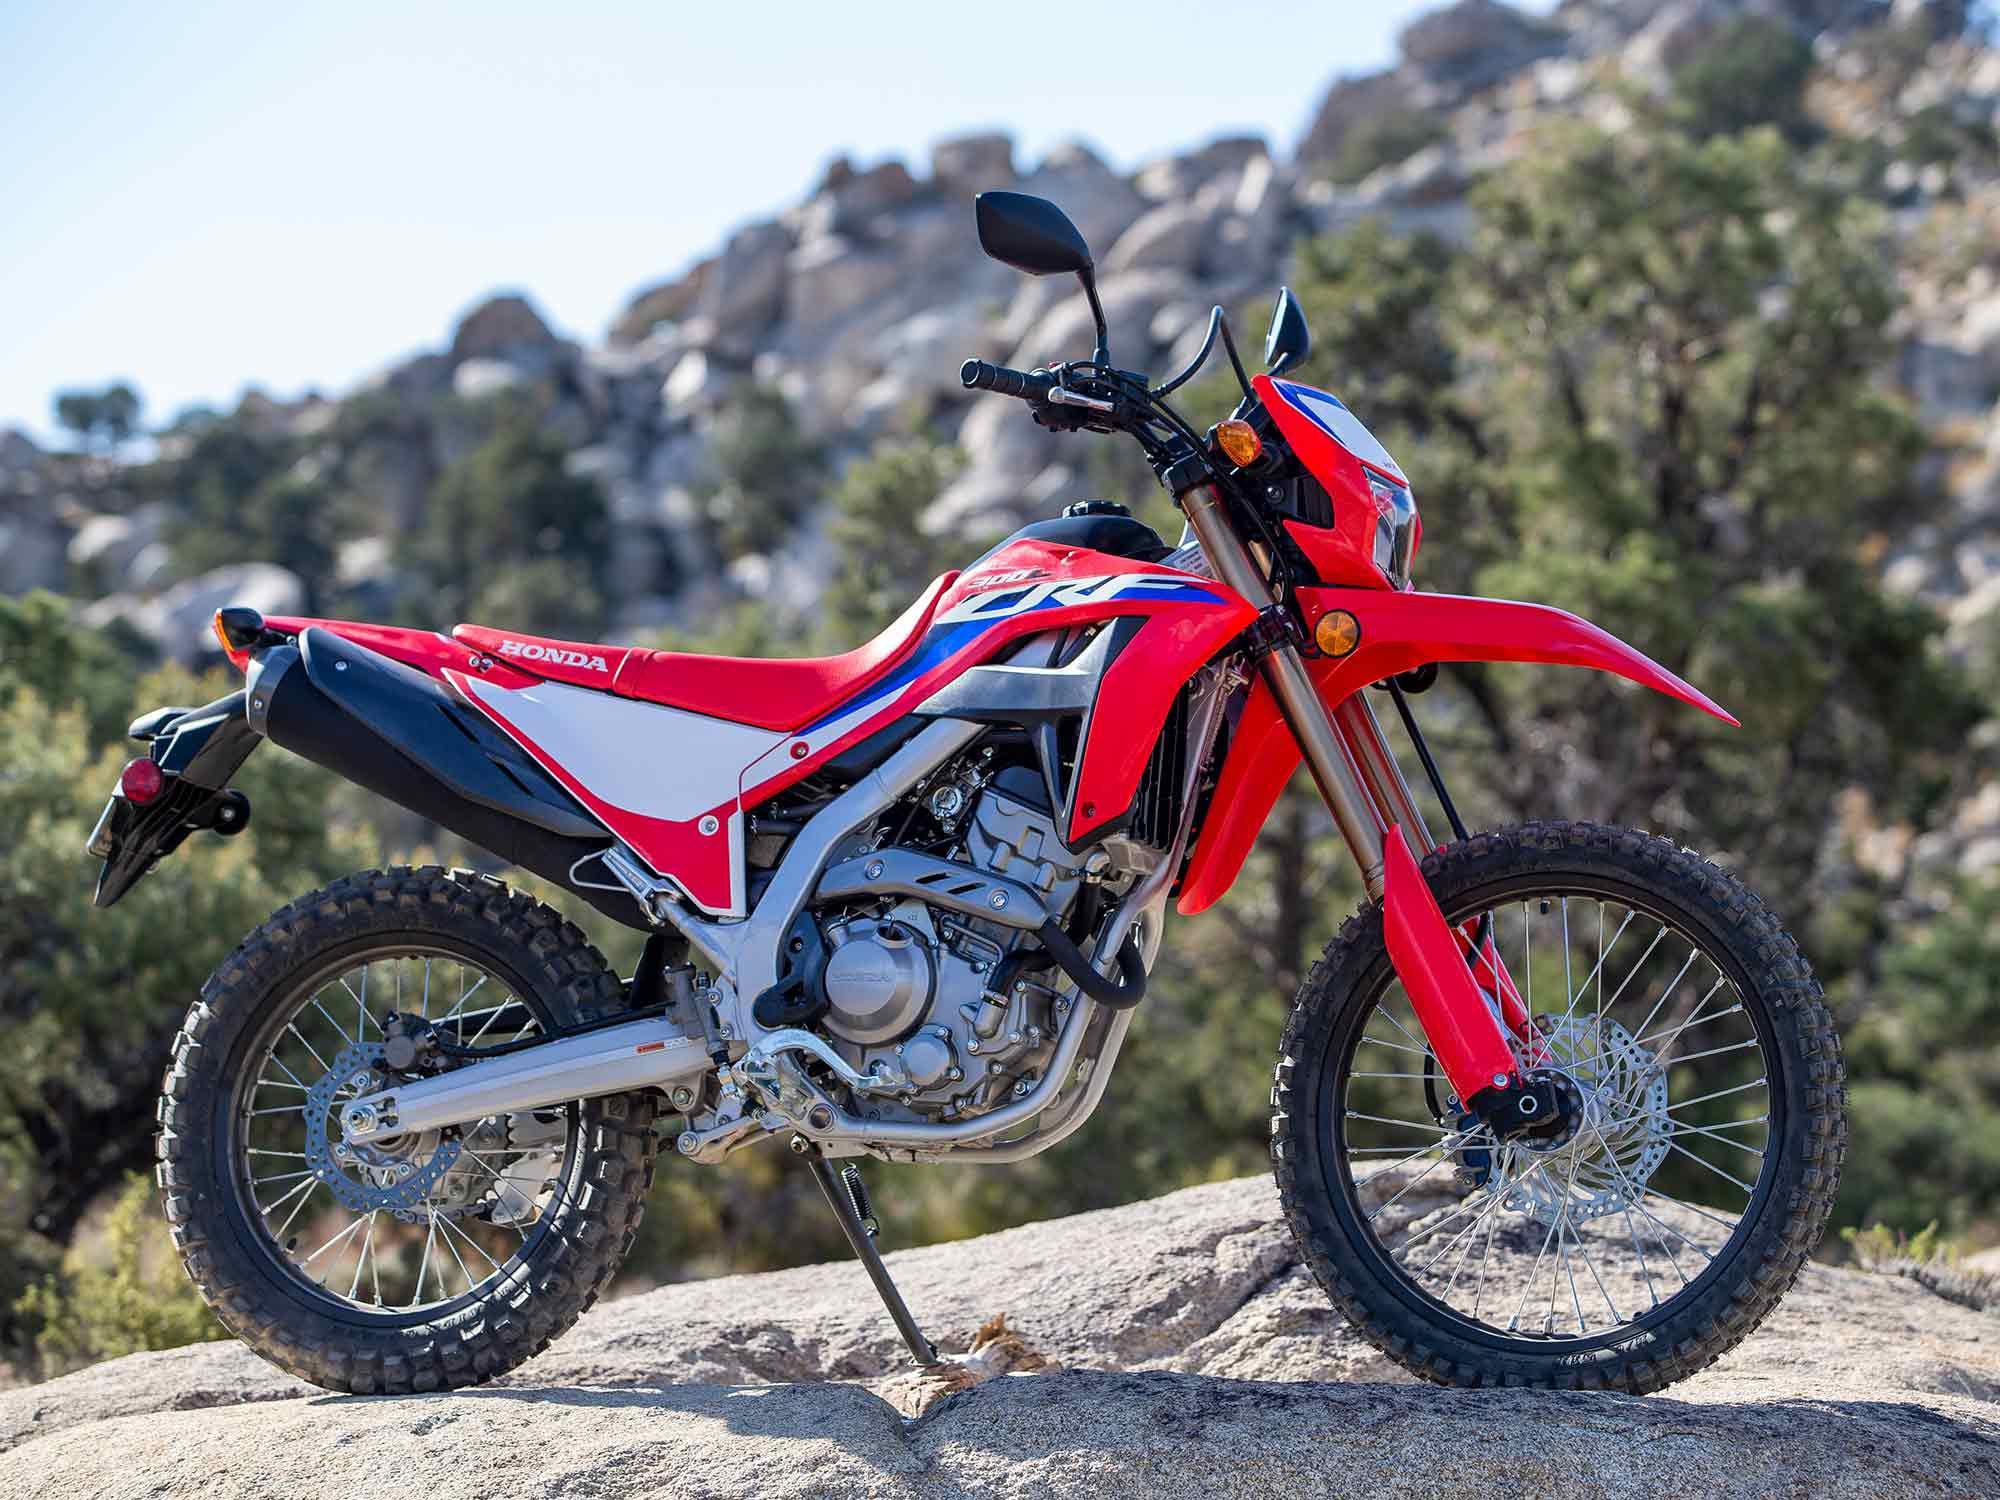 The best of both worlds, commute during the week, hit the dirt for adventure on
the weekends.